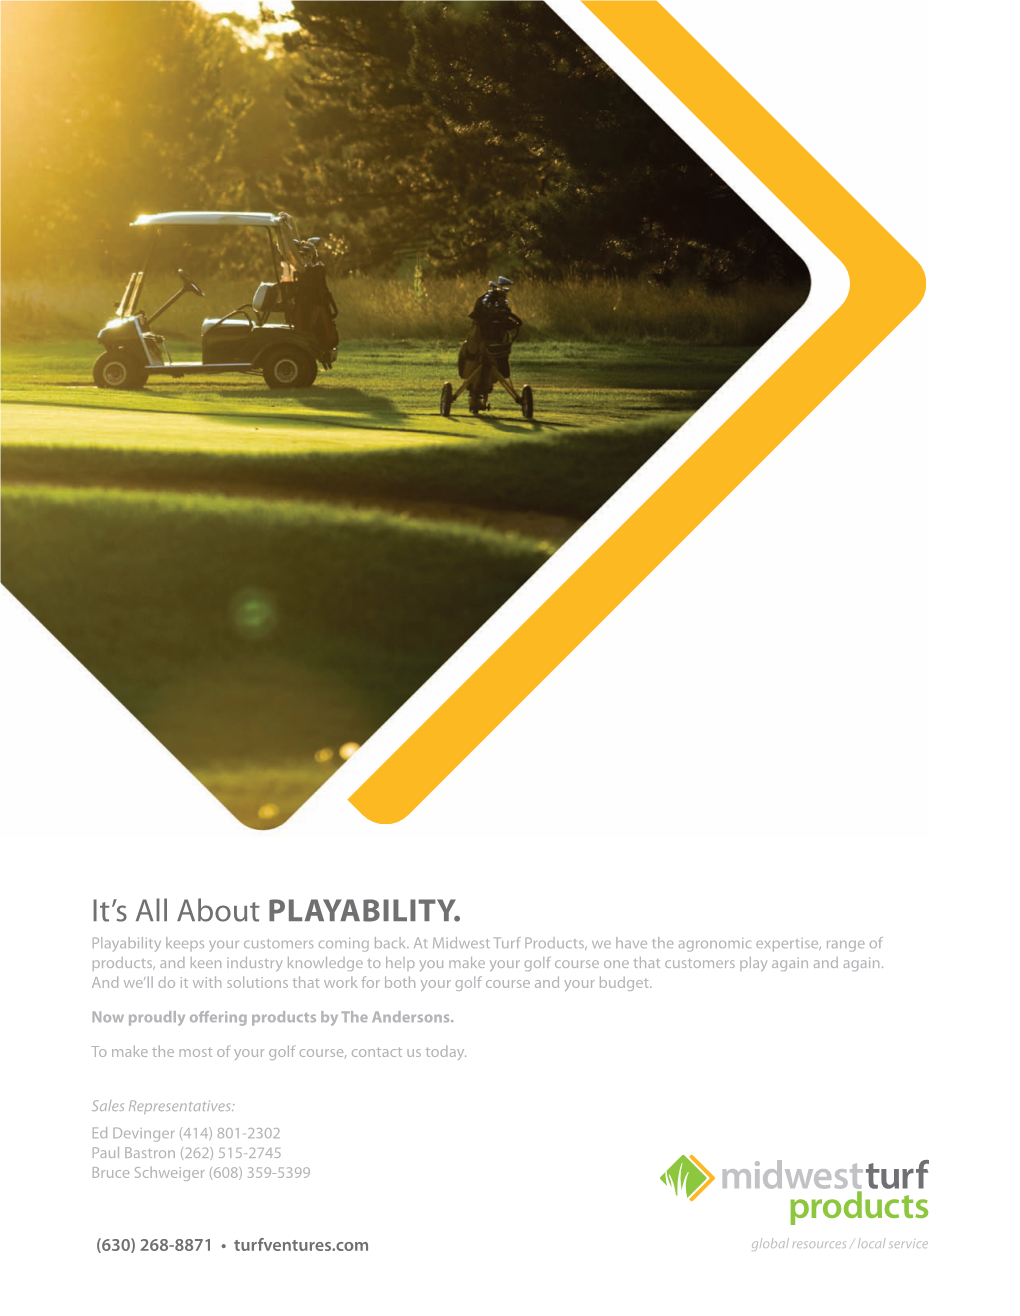 It's All About Playability